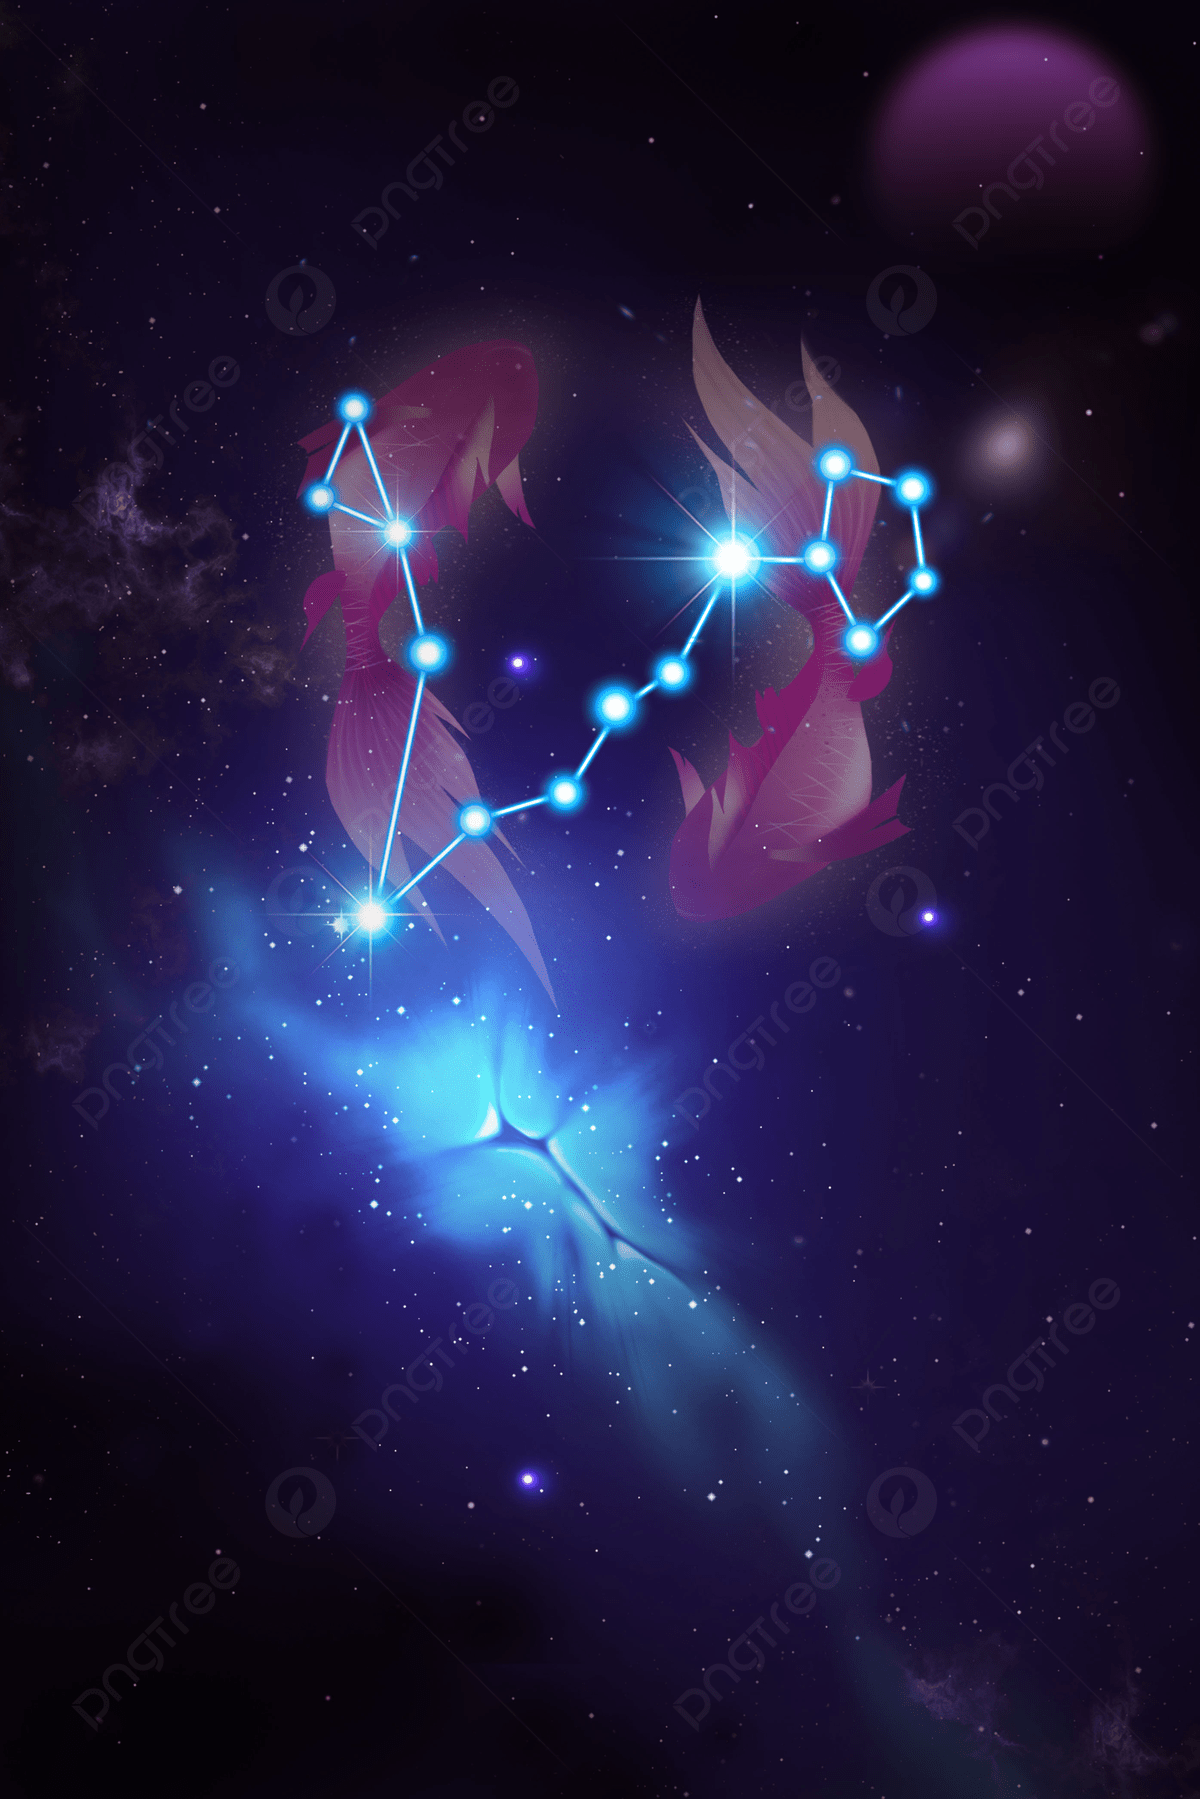 Pisces Background Image, HD Picture and Wallpaper For Free Download